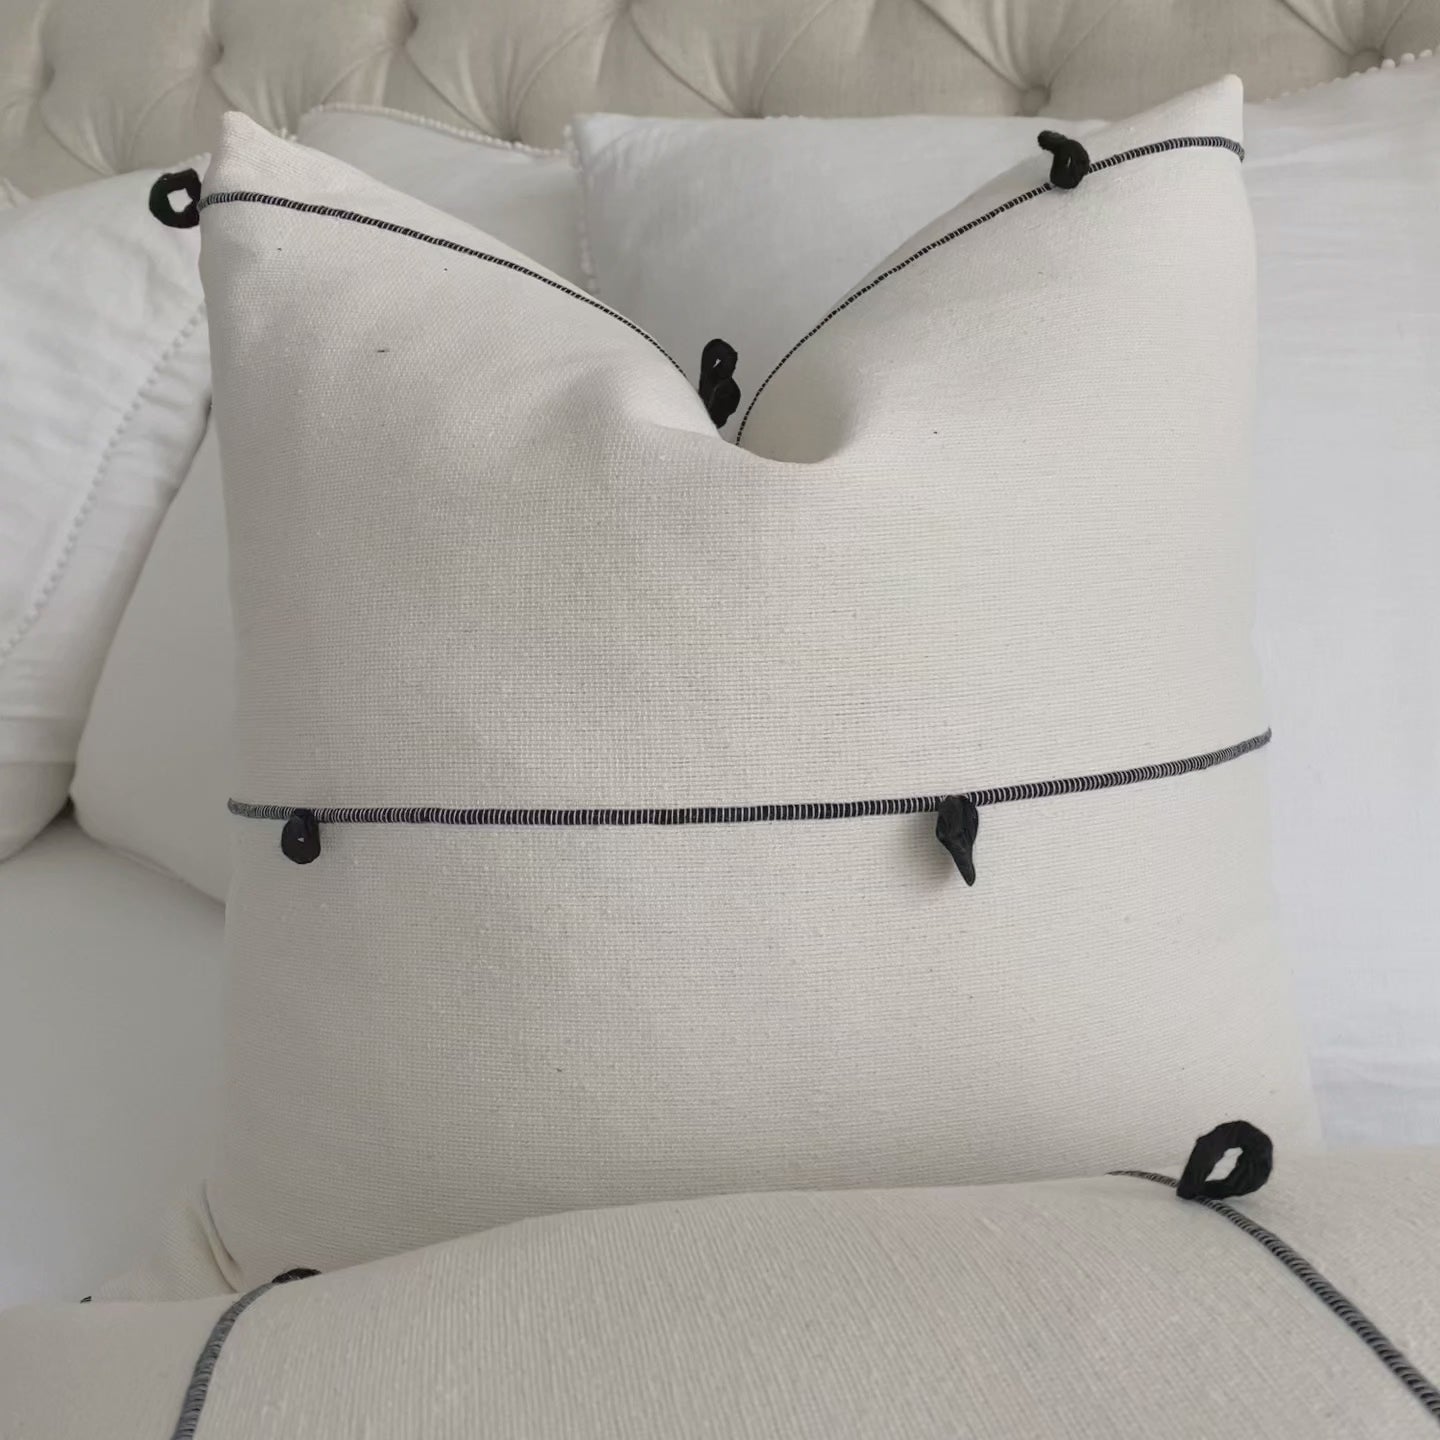 Schumacher Globo Knotted Handwoven Black White Designer Textured Throw Pillow Cover Product Video